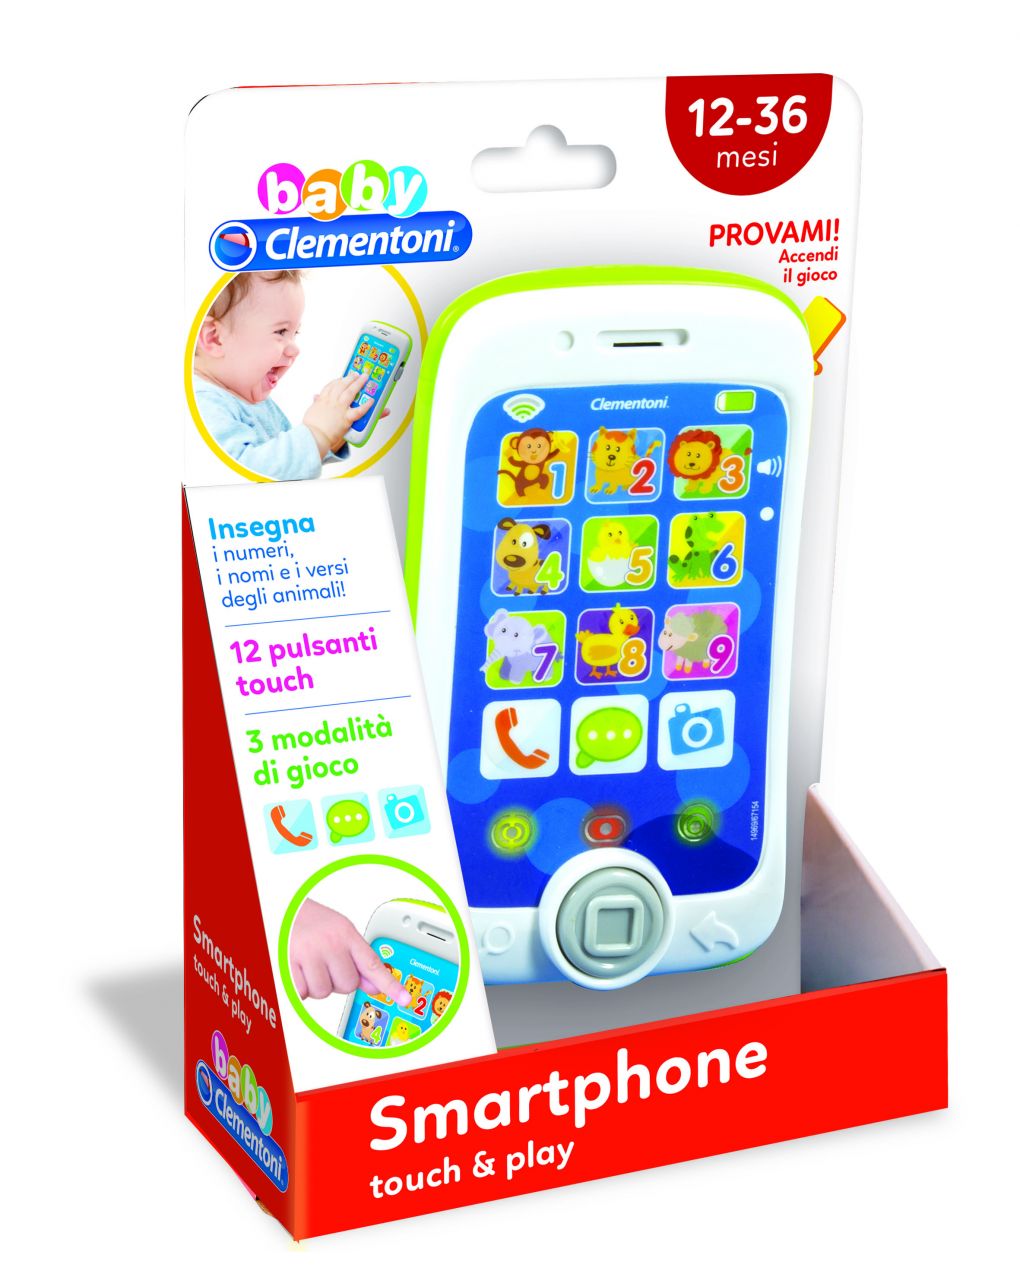 Baby clementoni - smartphone touch & play - Clementoni